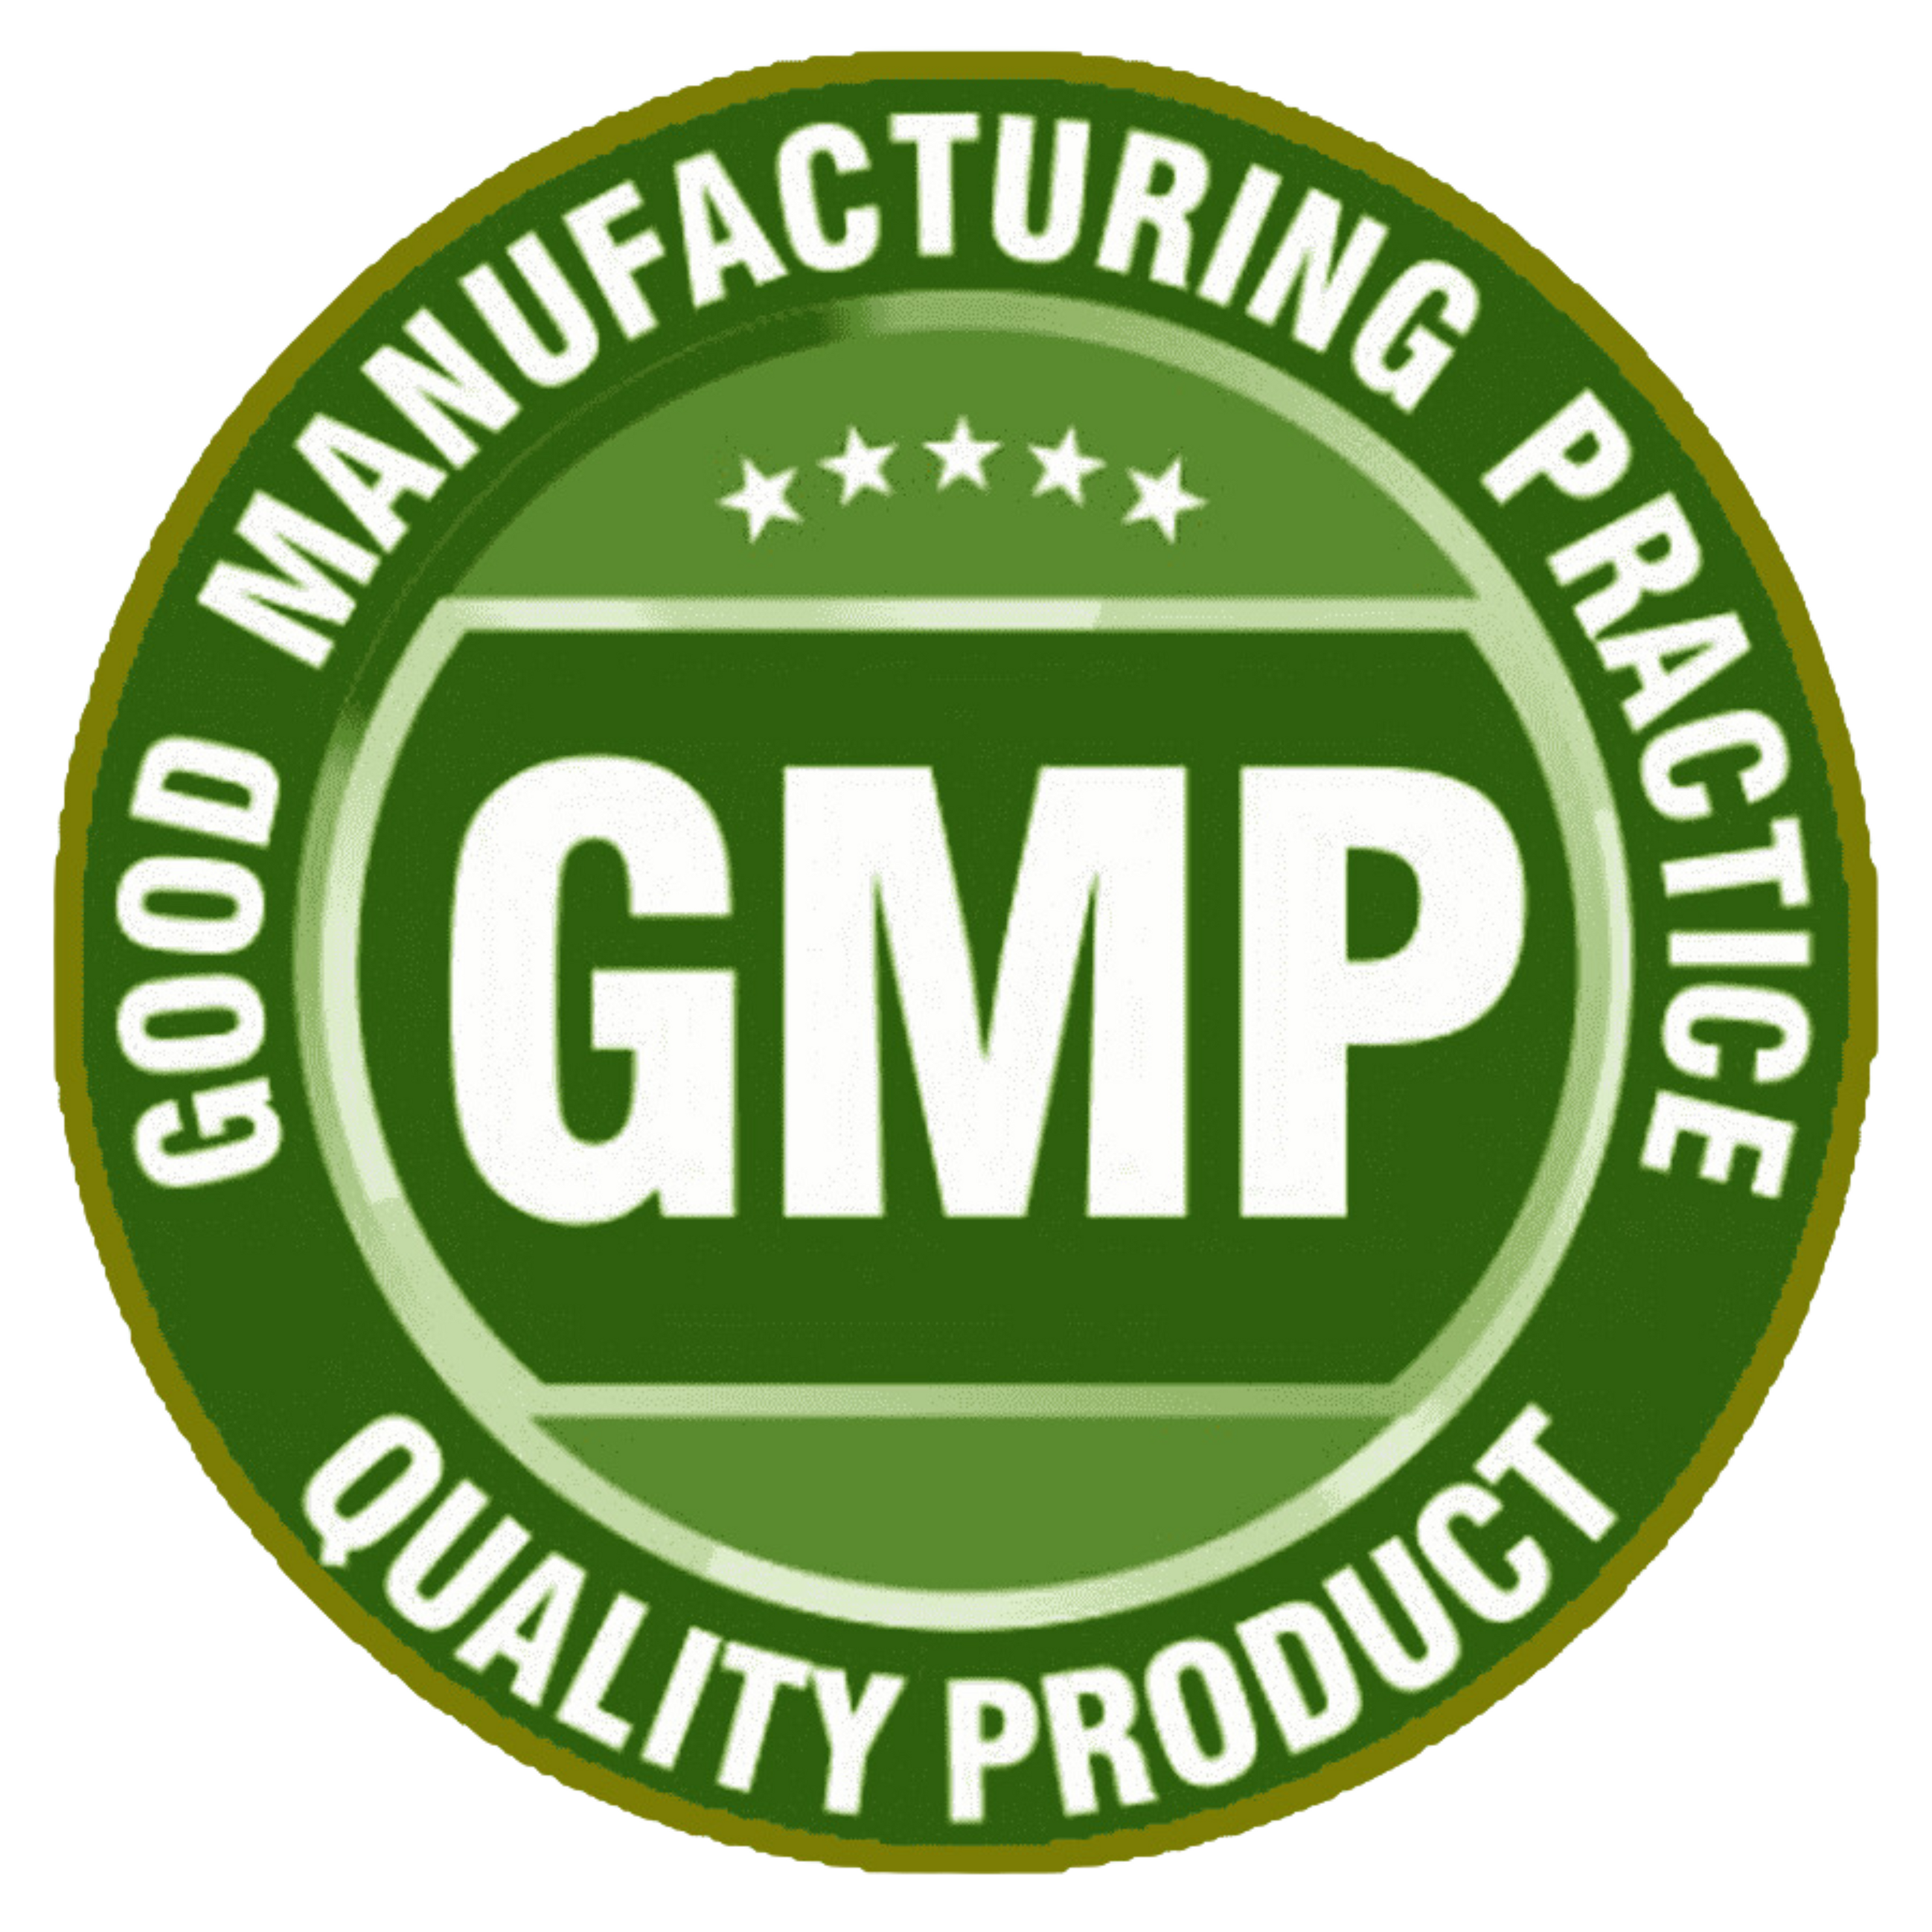 Good Manufacturing Practices logo, Glucose Support benefit slide, fat loss, weight loss, blood sugar, insulin resistance, carbohydrates, ketosis, ketones, antiaging, longevity, fatty liver, pcos. ozempic and metformin.